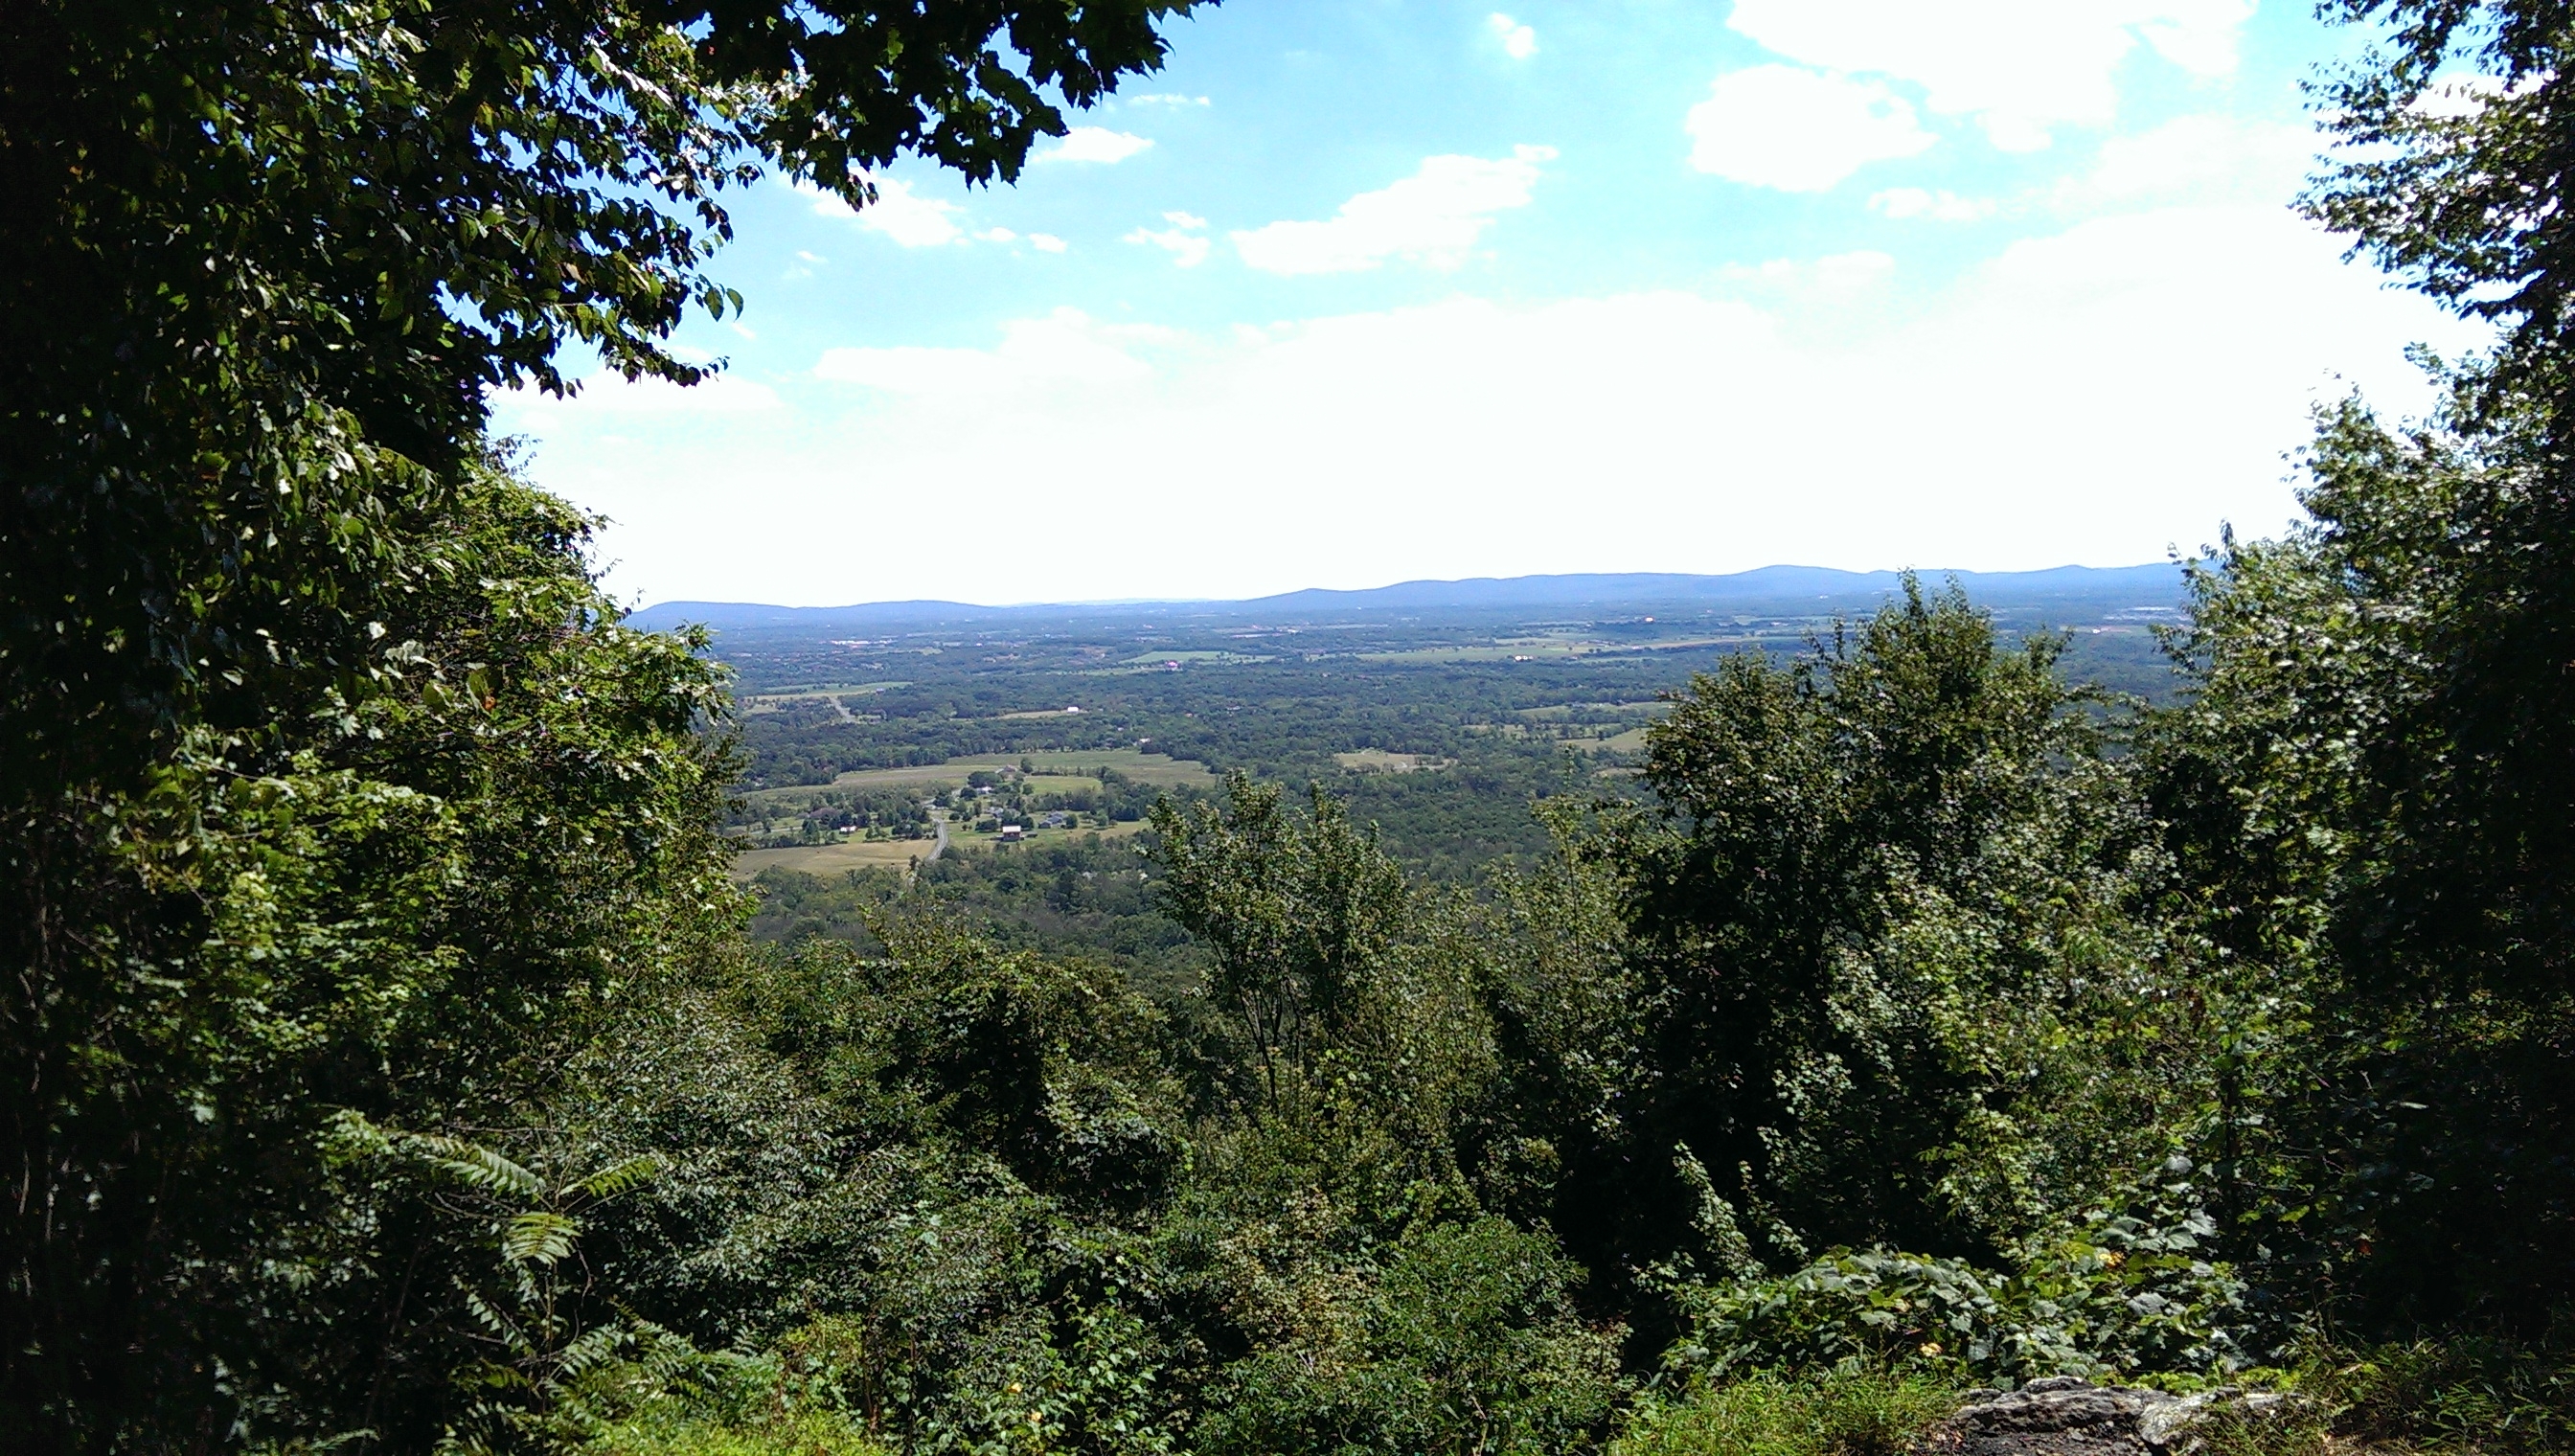 A nature overlook shows miles of rural landscape.